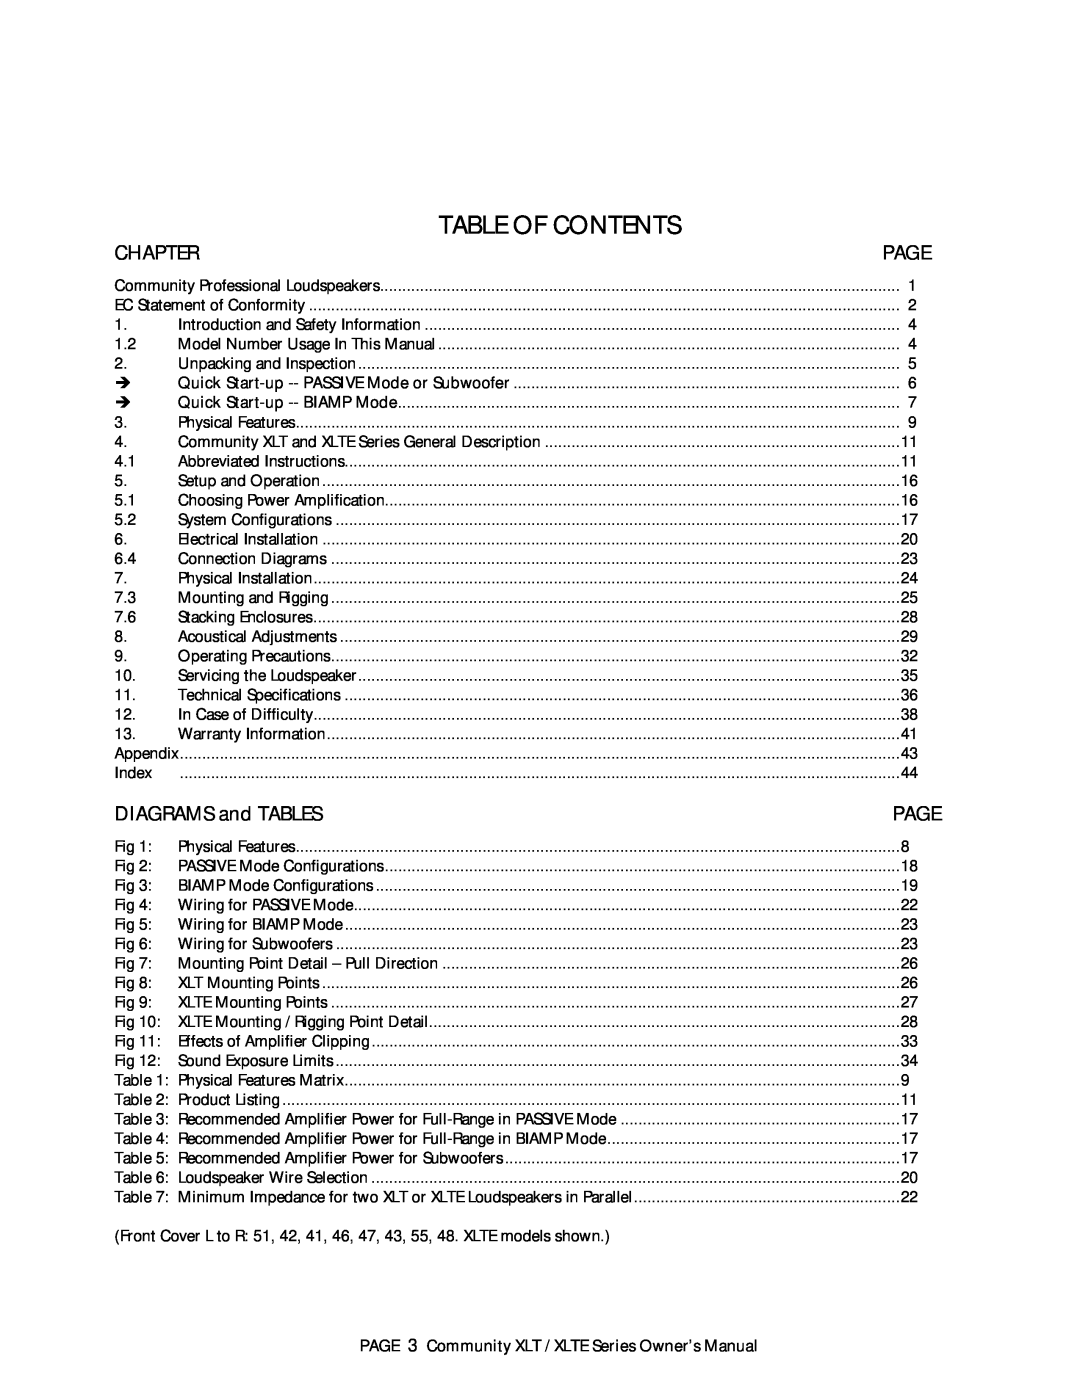 Atlas Sound XLTE owner manual Table Of Contents, Chapter, Page, DIAGRAMS and TABLES 